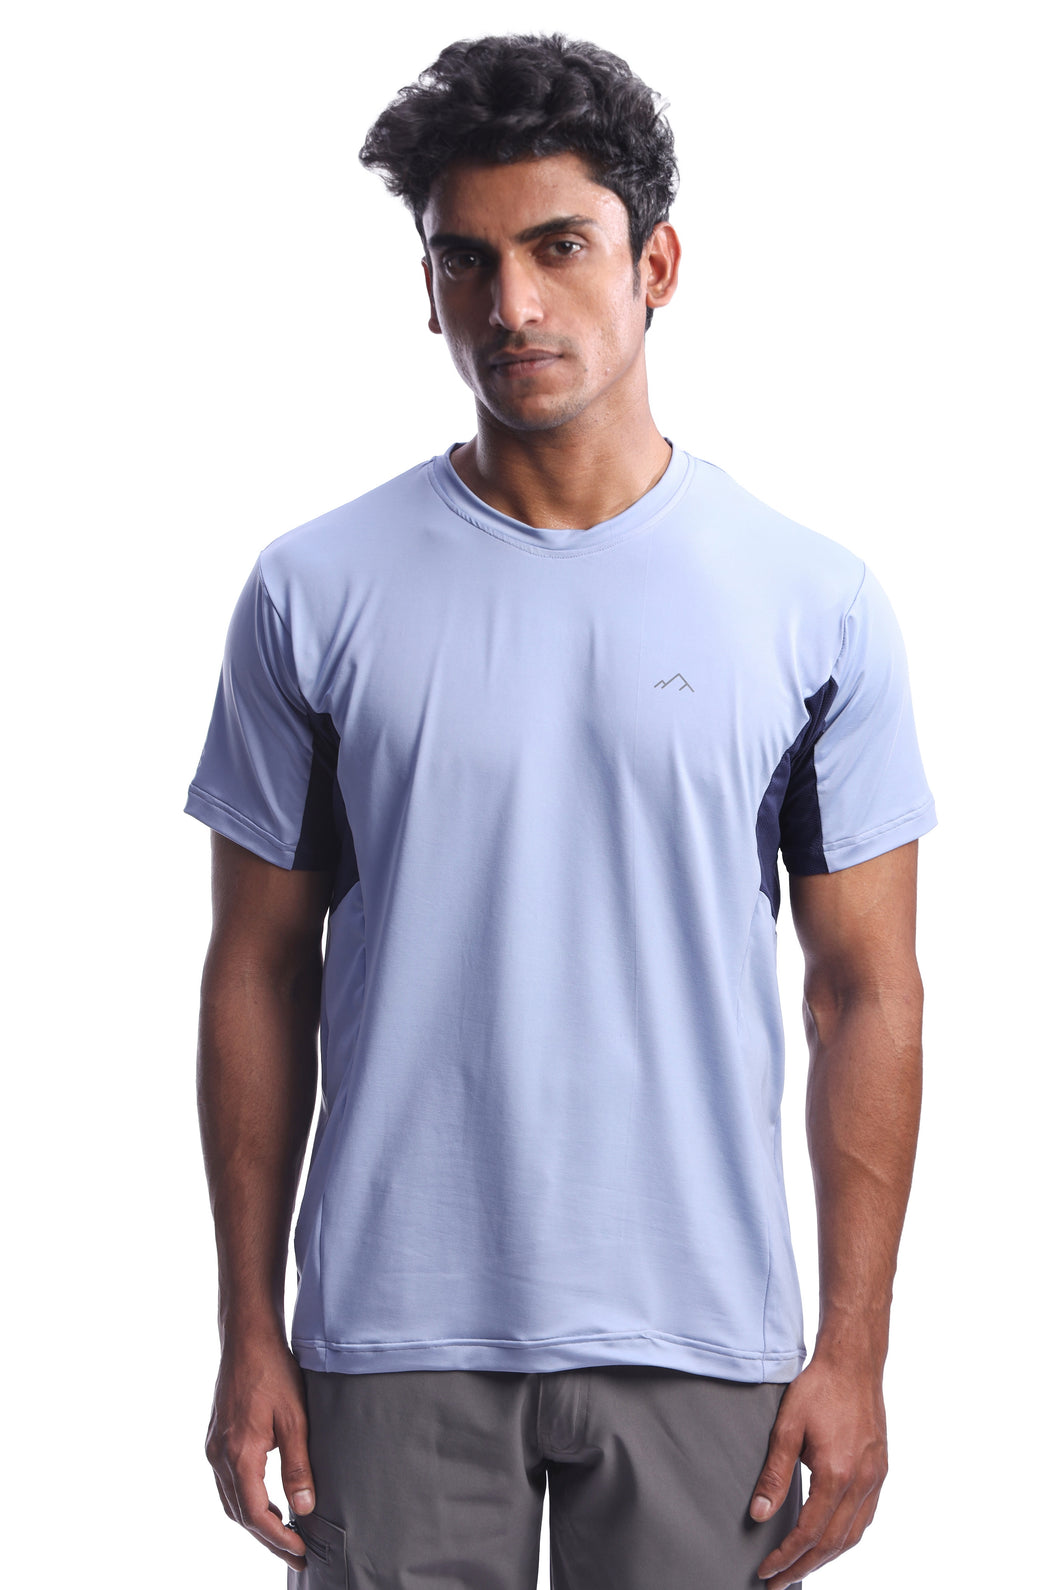 Outdoor Sportswear T-Shirt for Hiking, Running and Gyming | Blue